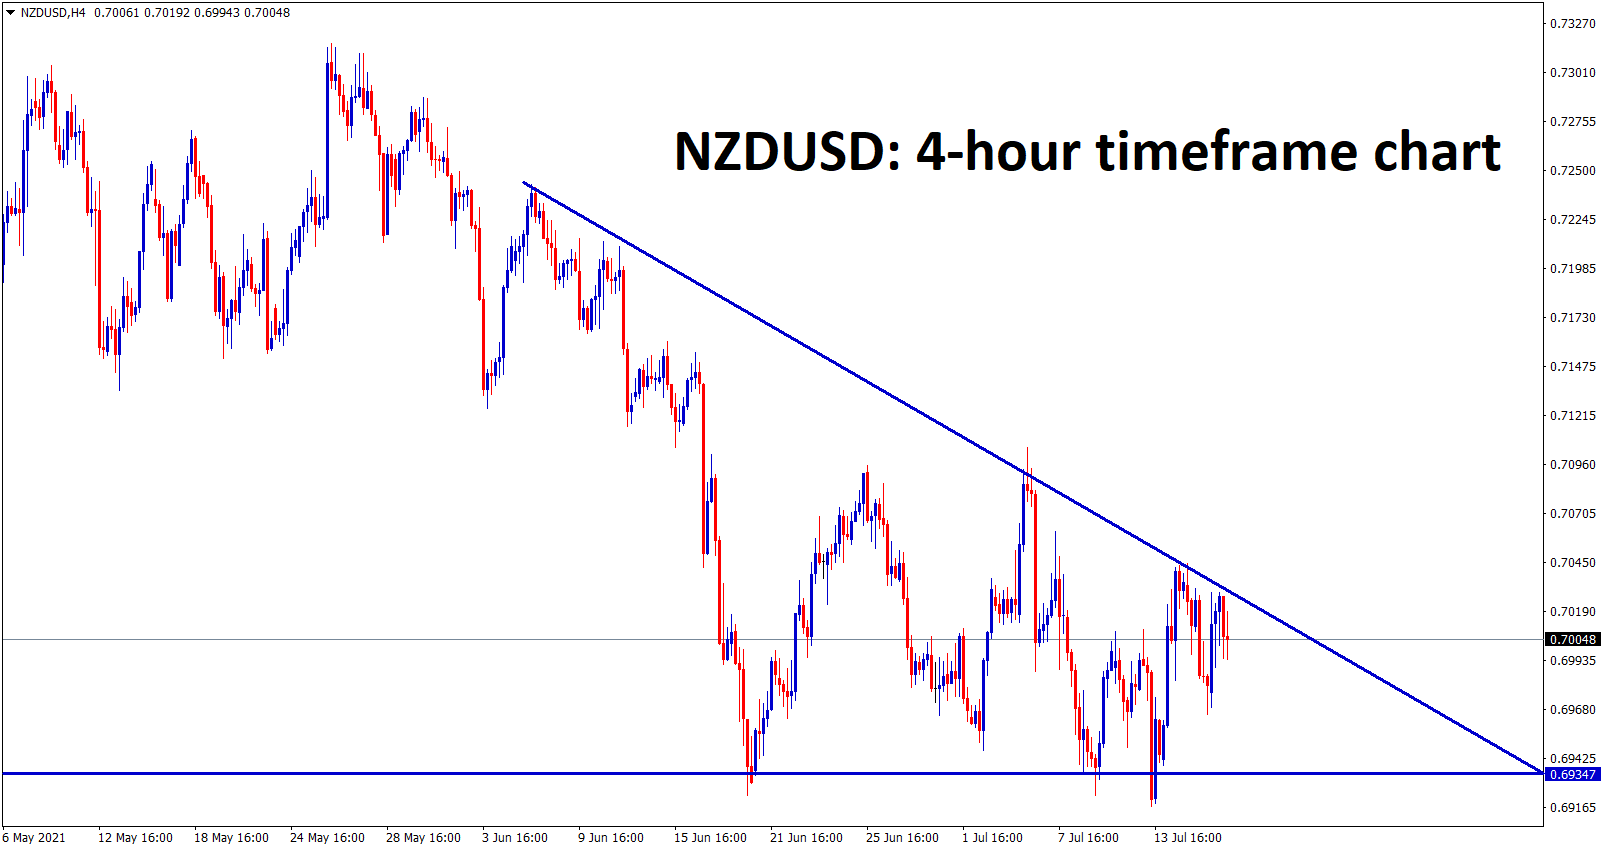 NZDUSD is moving in a descending triangle pattern for a long time triangle getting narrower we can expect a breakout soon from this triangle pattern.